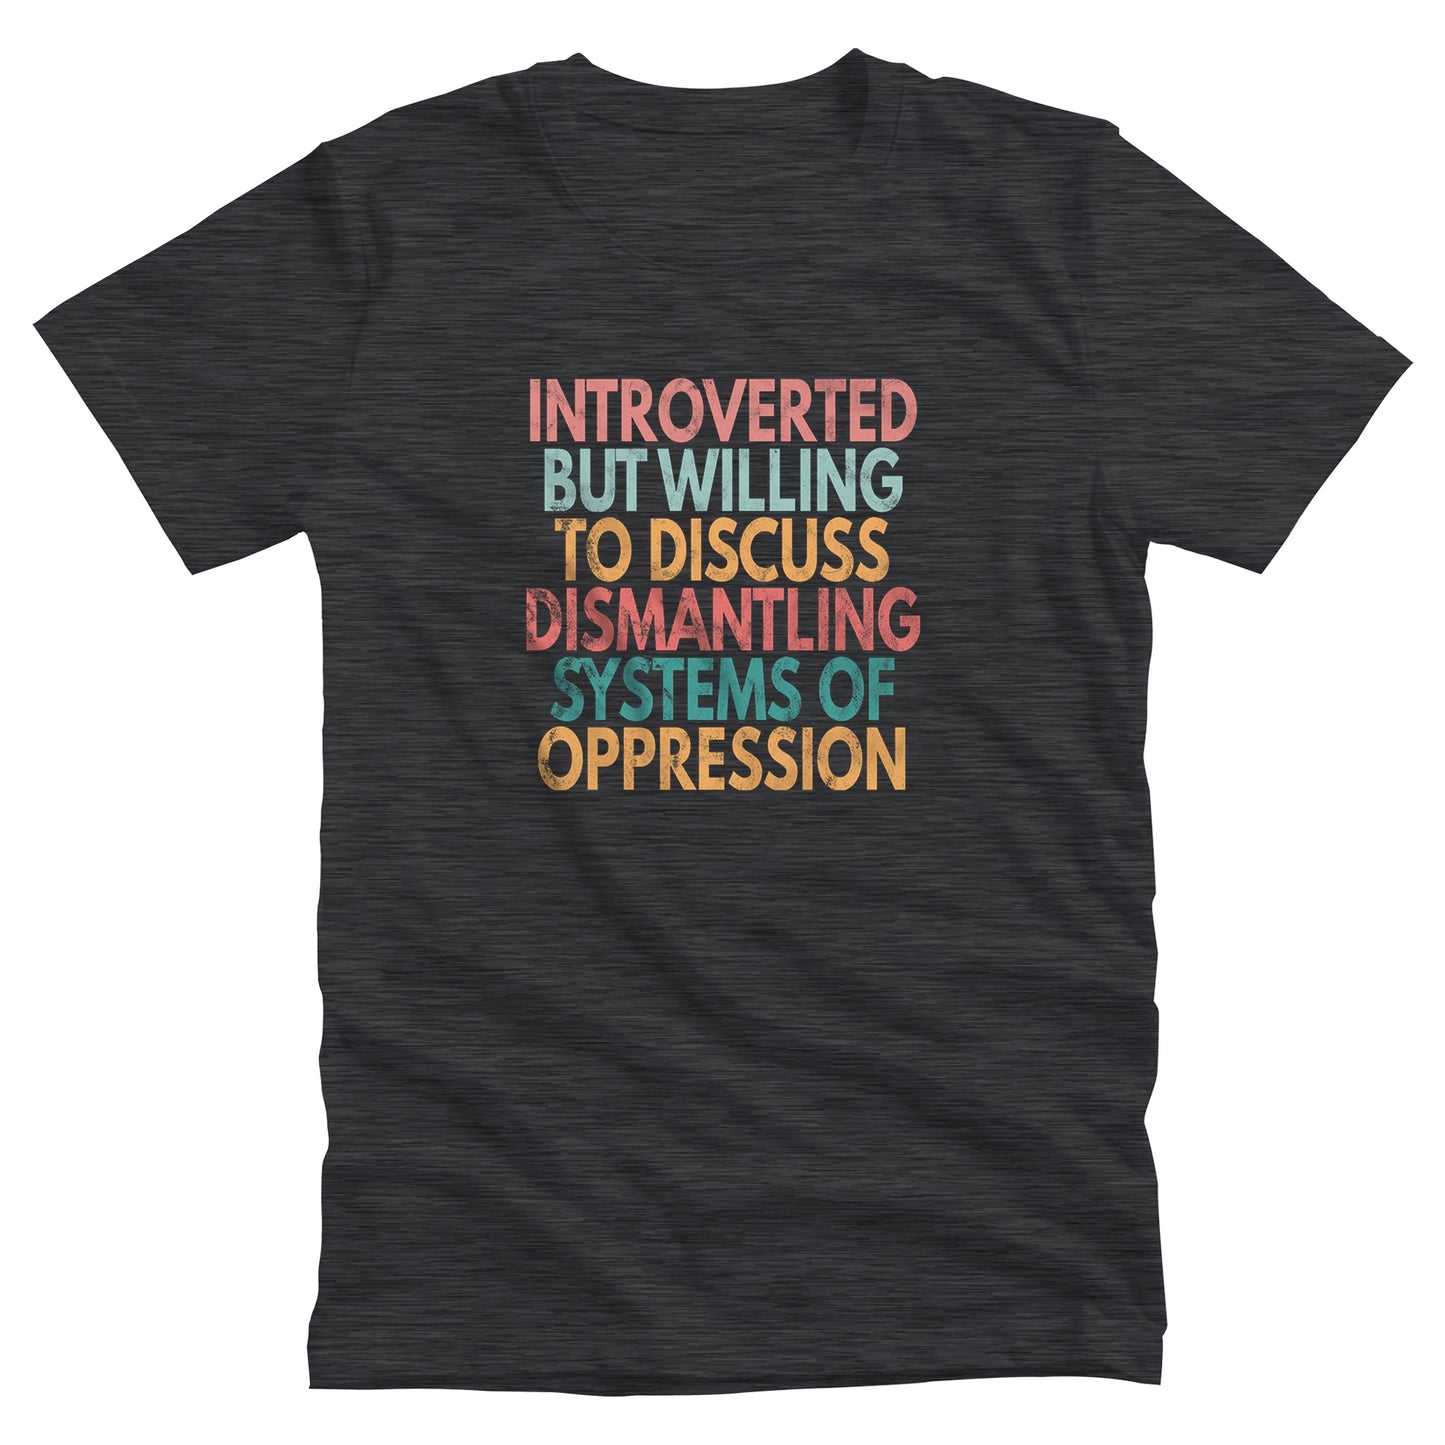 Dark Grey Heather color unisex t-shirt that says, “Introverted But Willing to Discuss Dismantling Systems of Oppression” spread out in 6 rows with each row a different color. “Introverted” is red/dark pink, “But Willing” is blue-green, “To Discuss” is yellow/orange, “Dismantling” is red/dark pink, “Systems of” is a dark blue-green, and “Oppression” is yellow/orange. The text has a slightly distressed look.